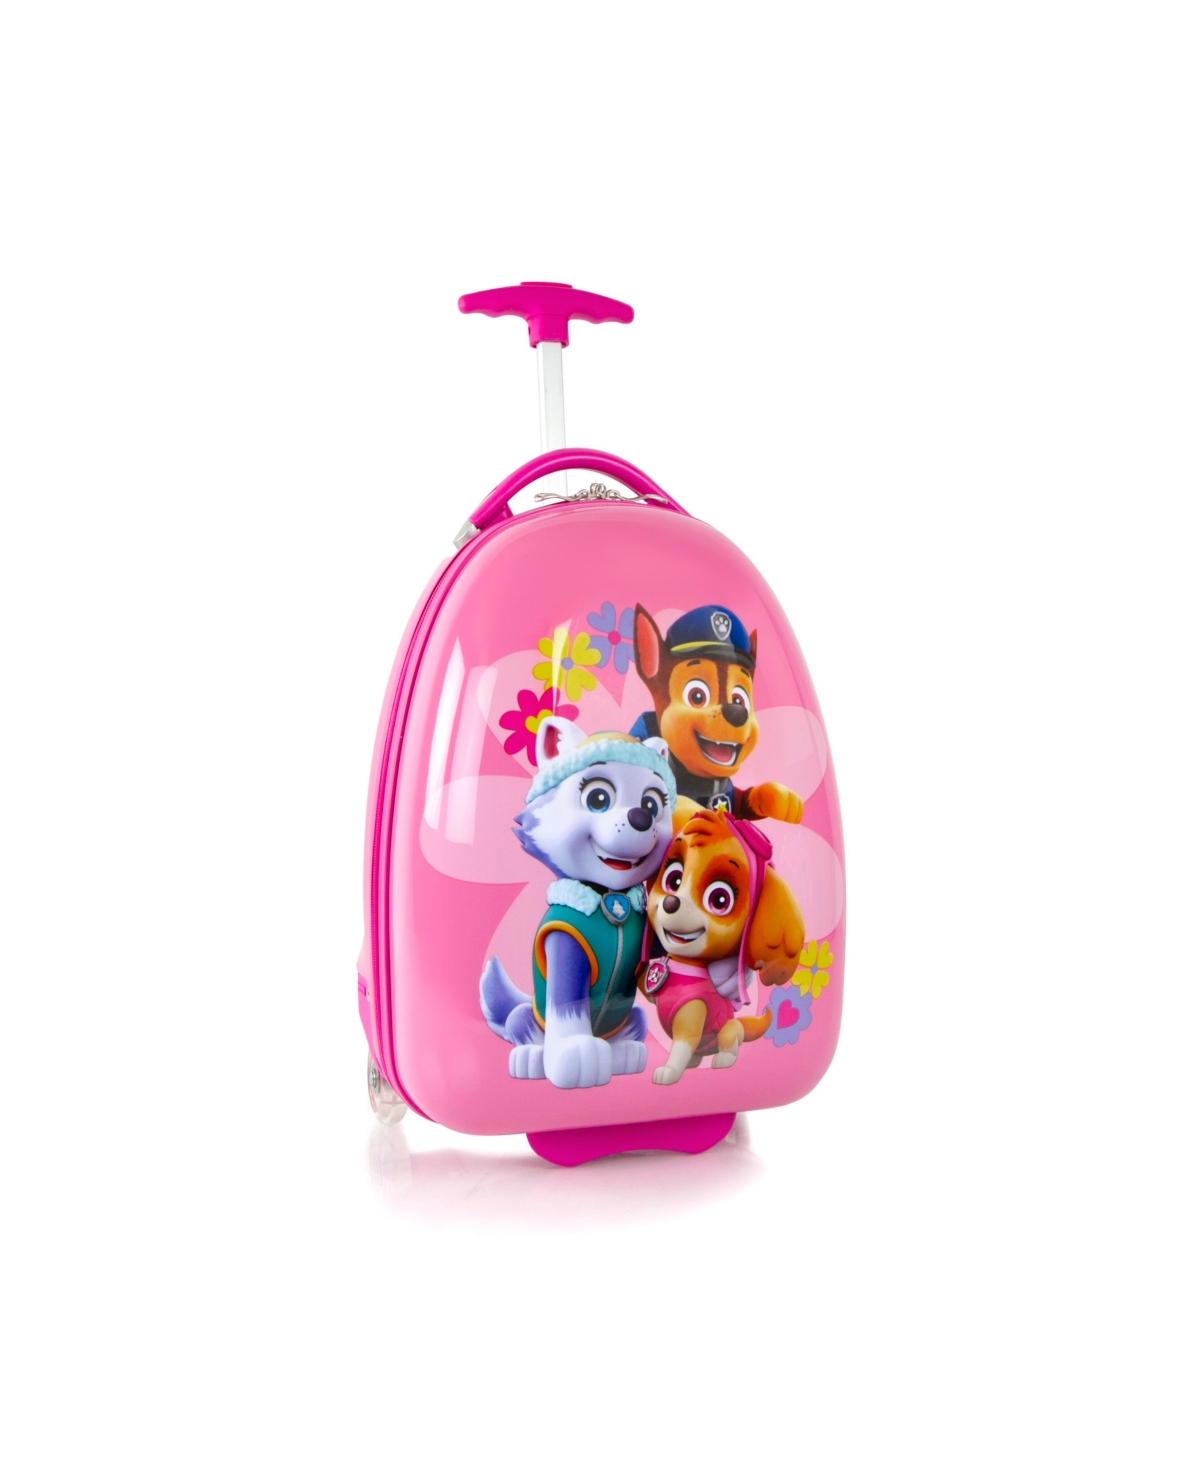 Nickelodeon 18" Paw Patrol Egg Shape Lightweight Carry-On Luggage - Pink